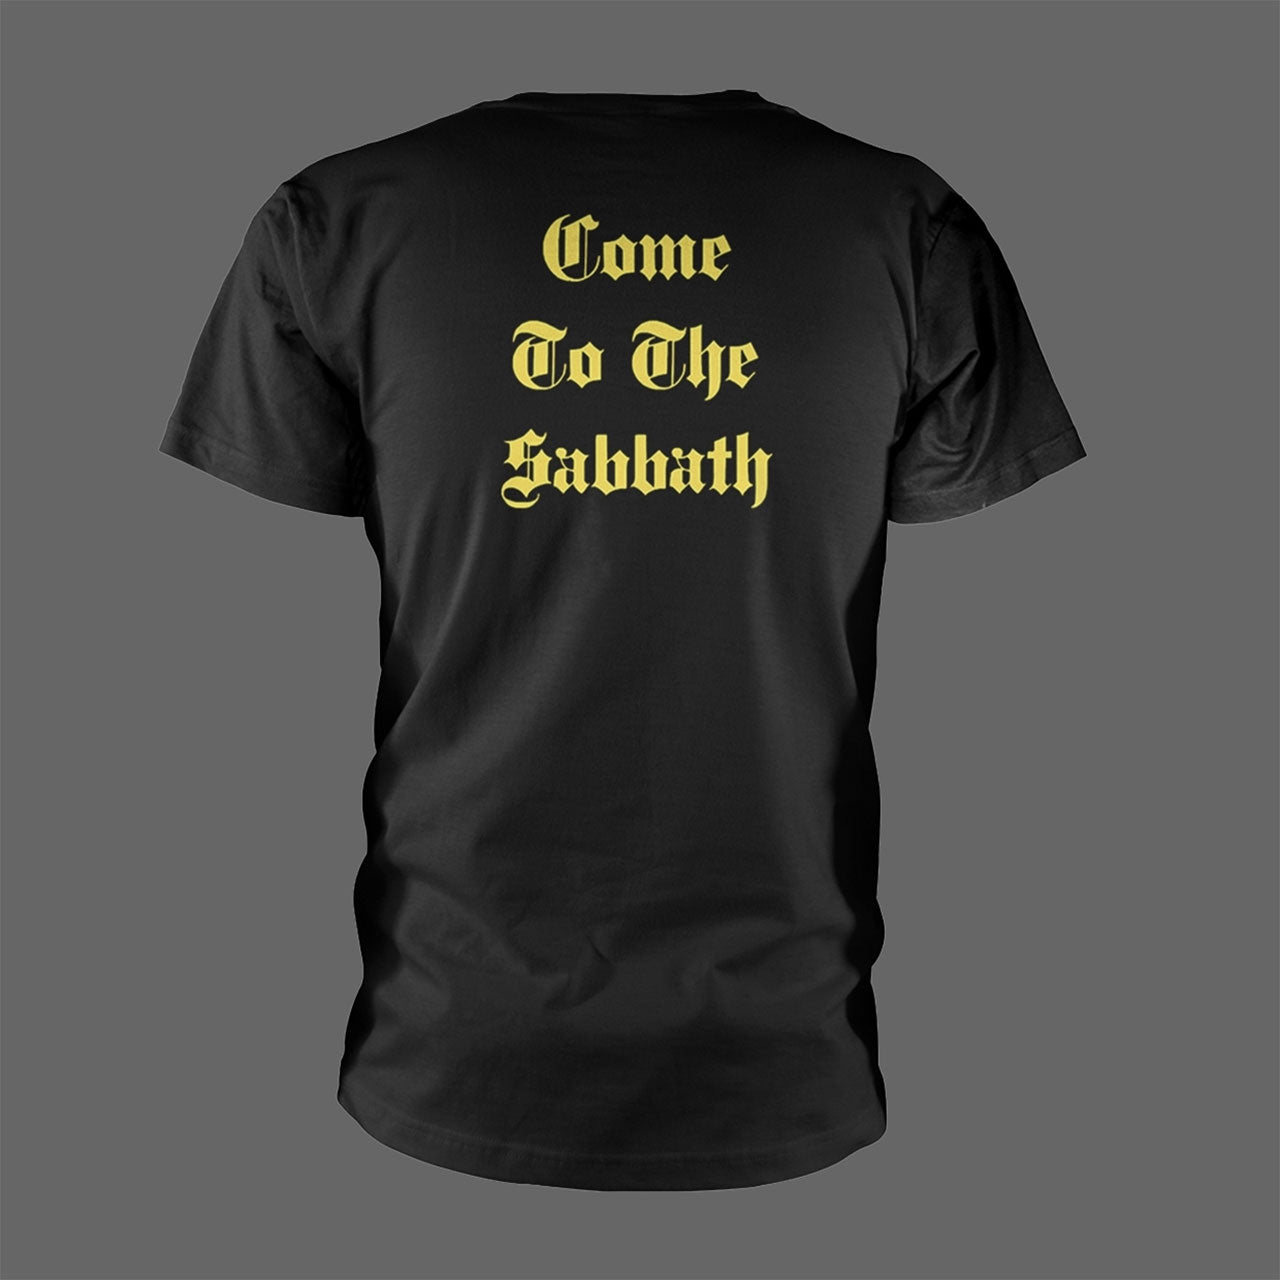 Electric Wizard - Candle / Come to the Sabbath (T-Shirt)